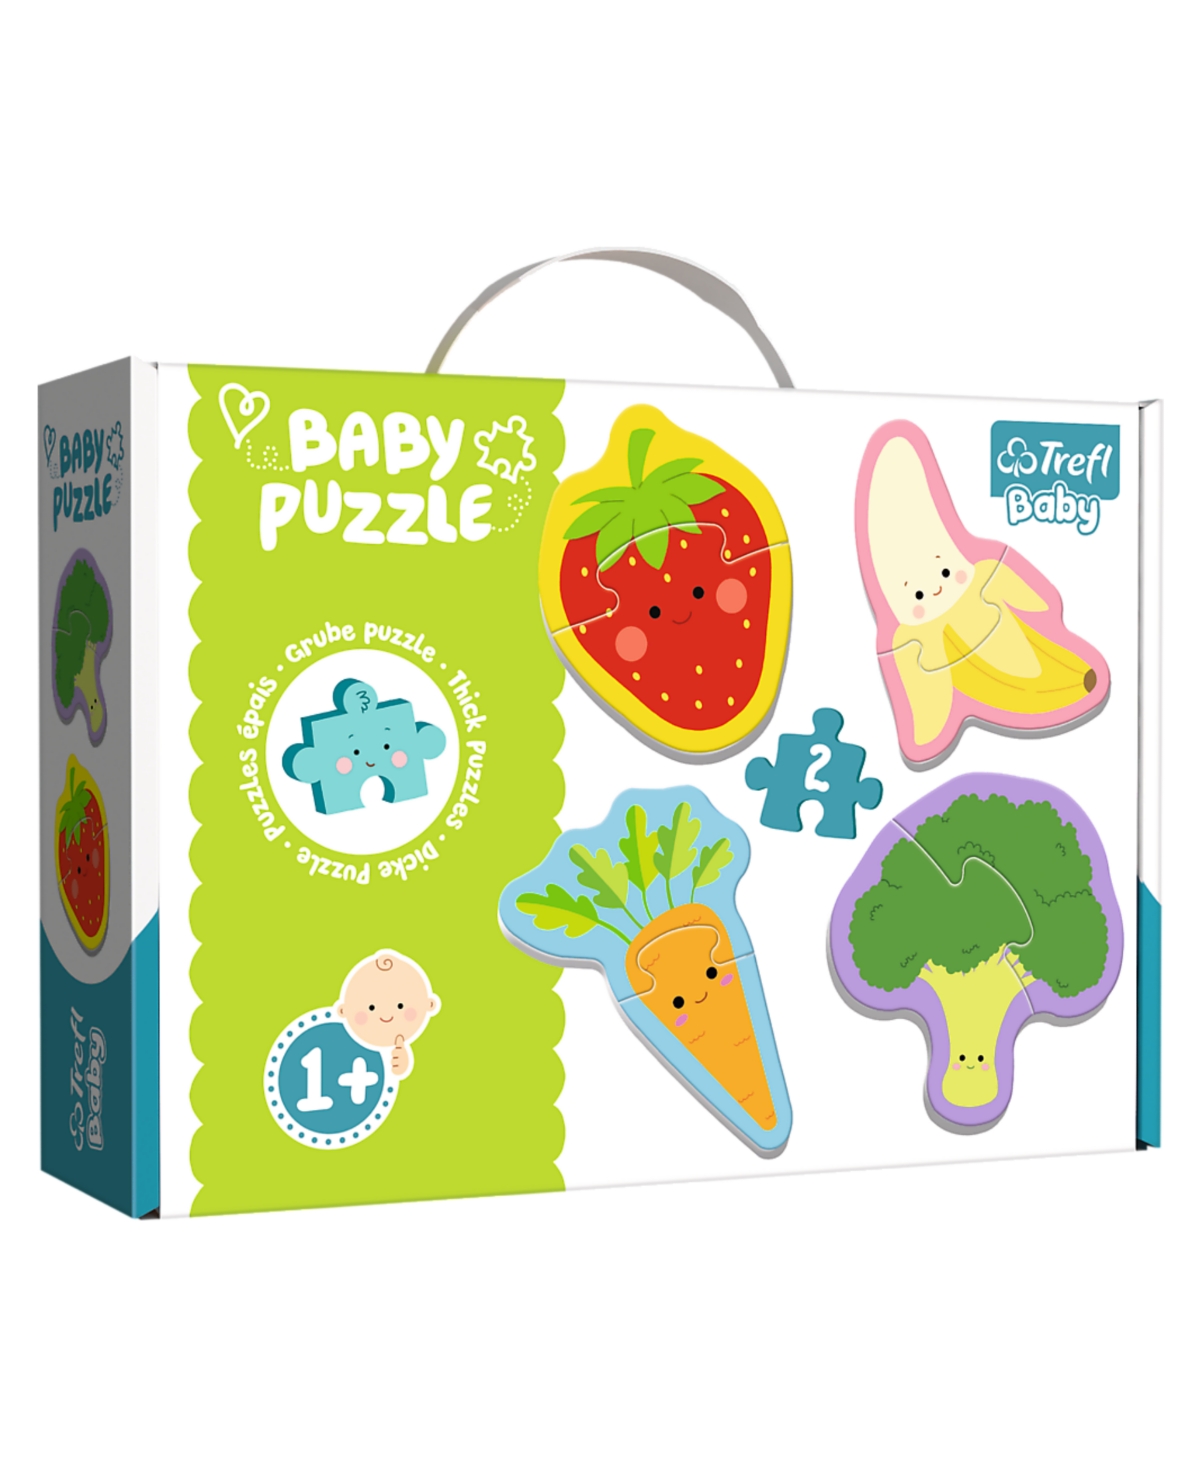 Trefl Baby Classic Puzzle- Vegetables And Fruits 8 Piece In Multi